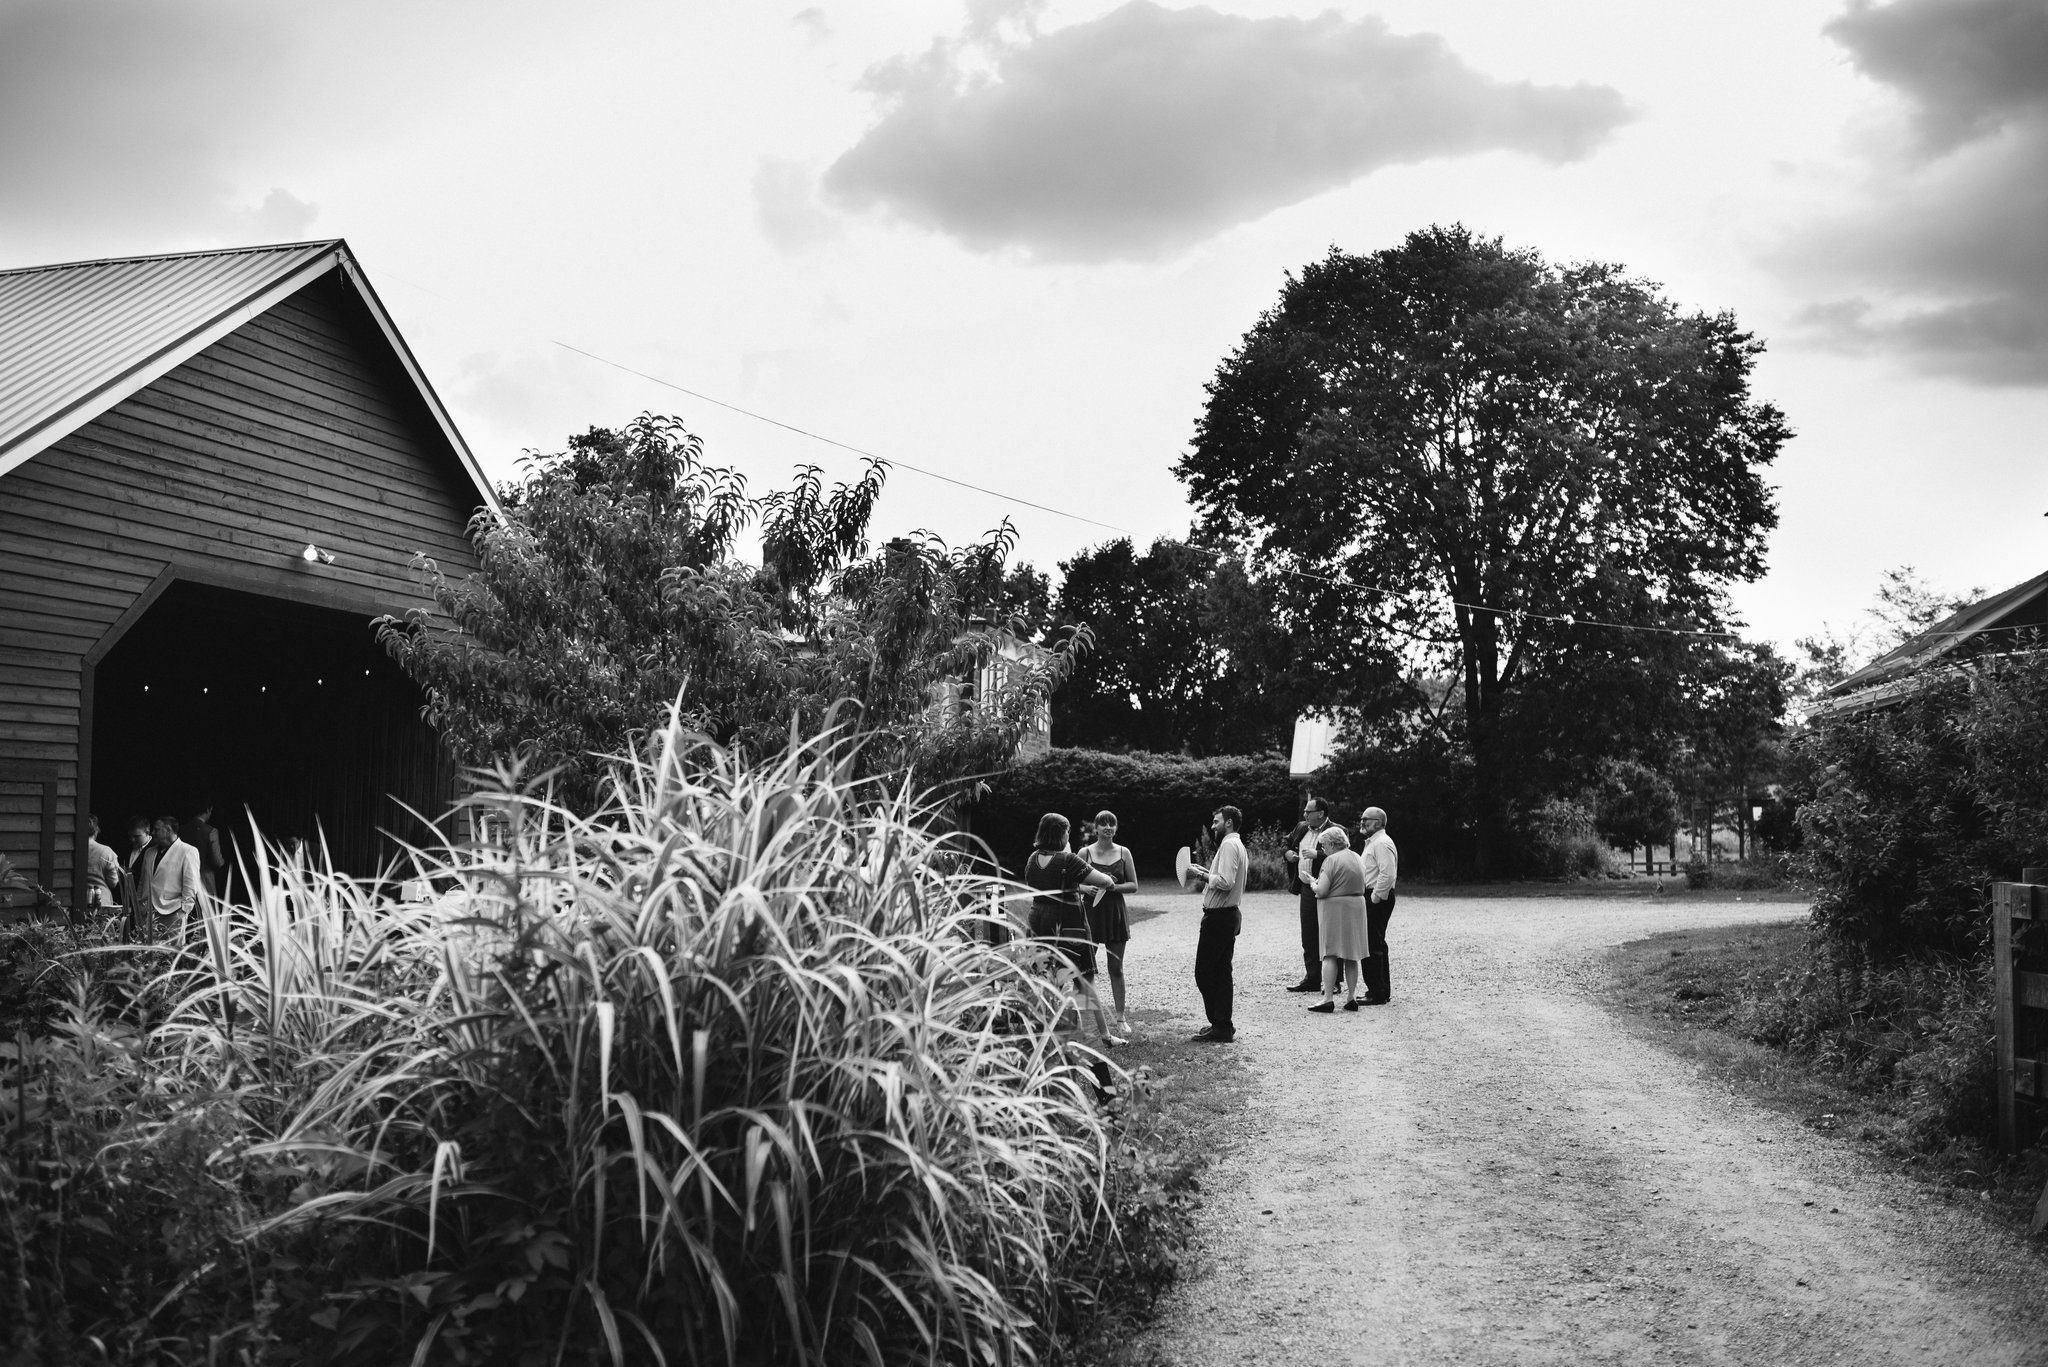 Rocklands Farm, Maryland, Intimate Wedding, Baltimore Wedding Photographer, Sungold Flower Co, Rustic, Romantic, Barn Wedding, Wedding Guests Talking Outside Barn, Black and White Photo